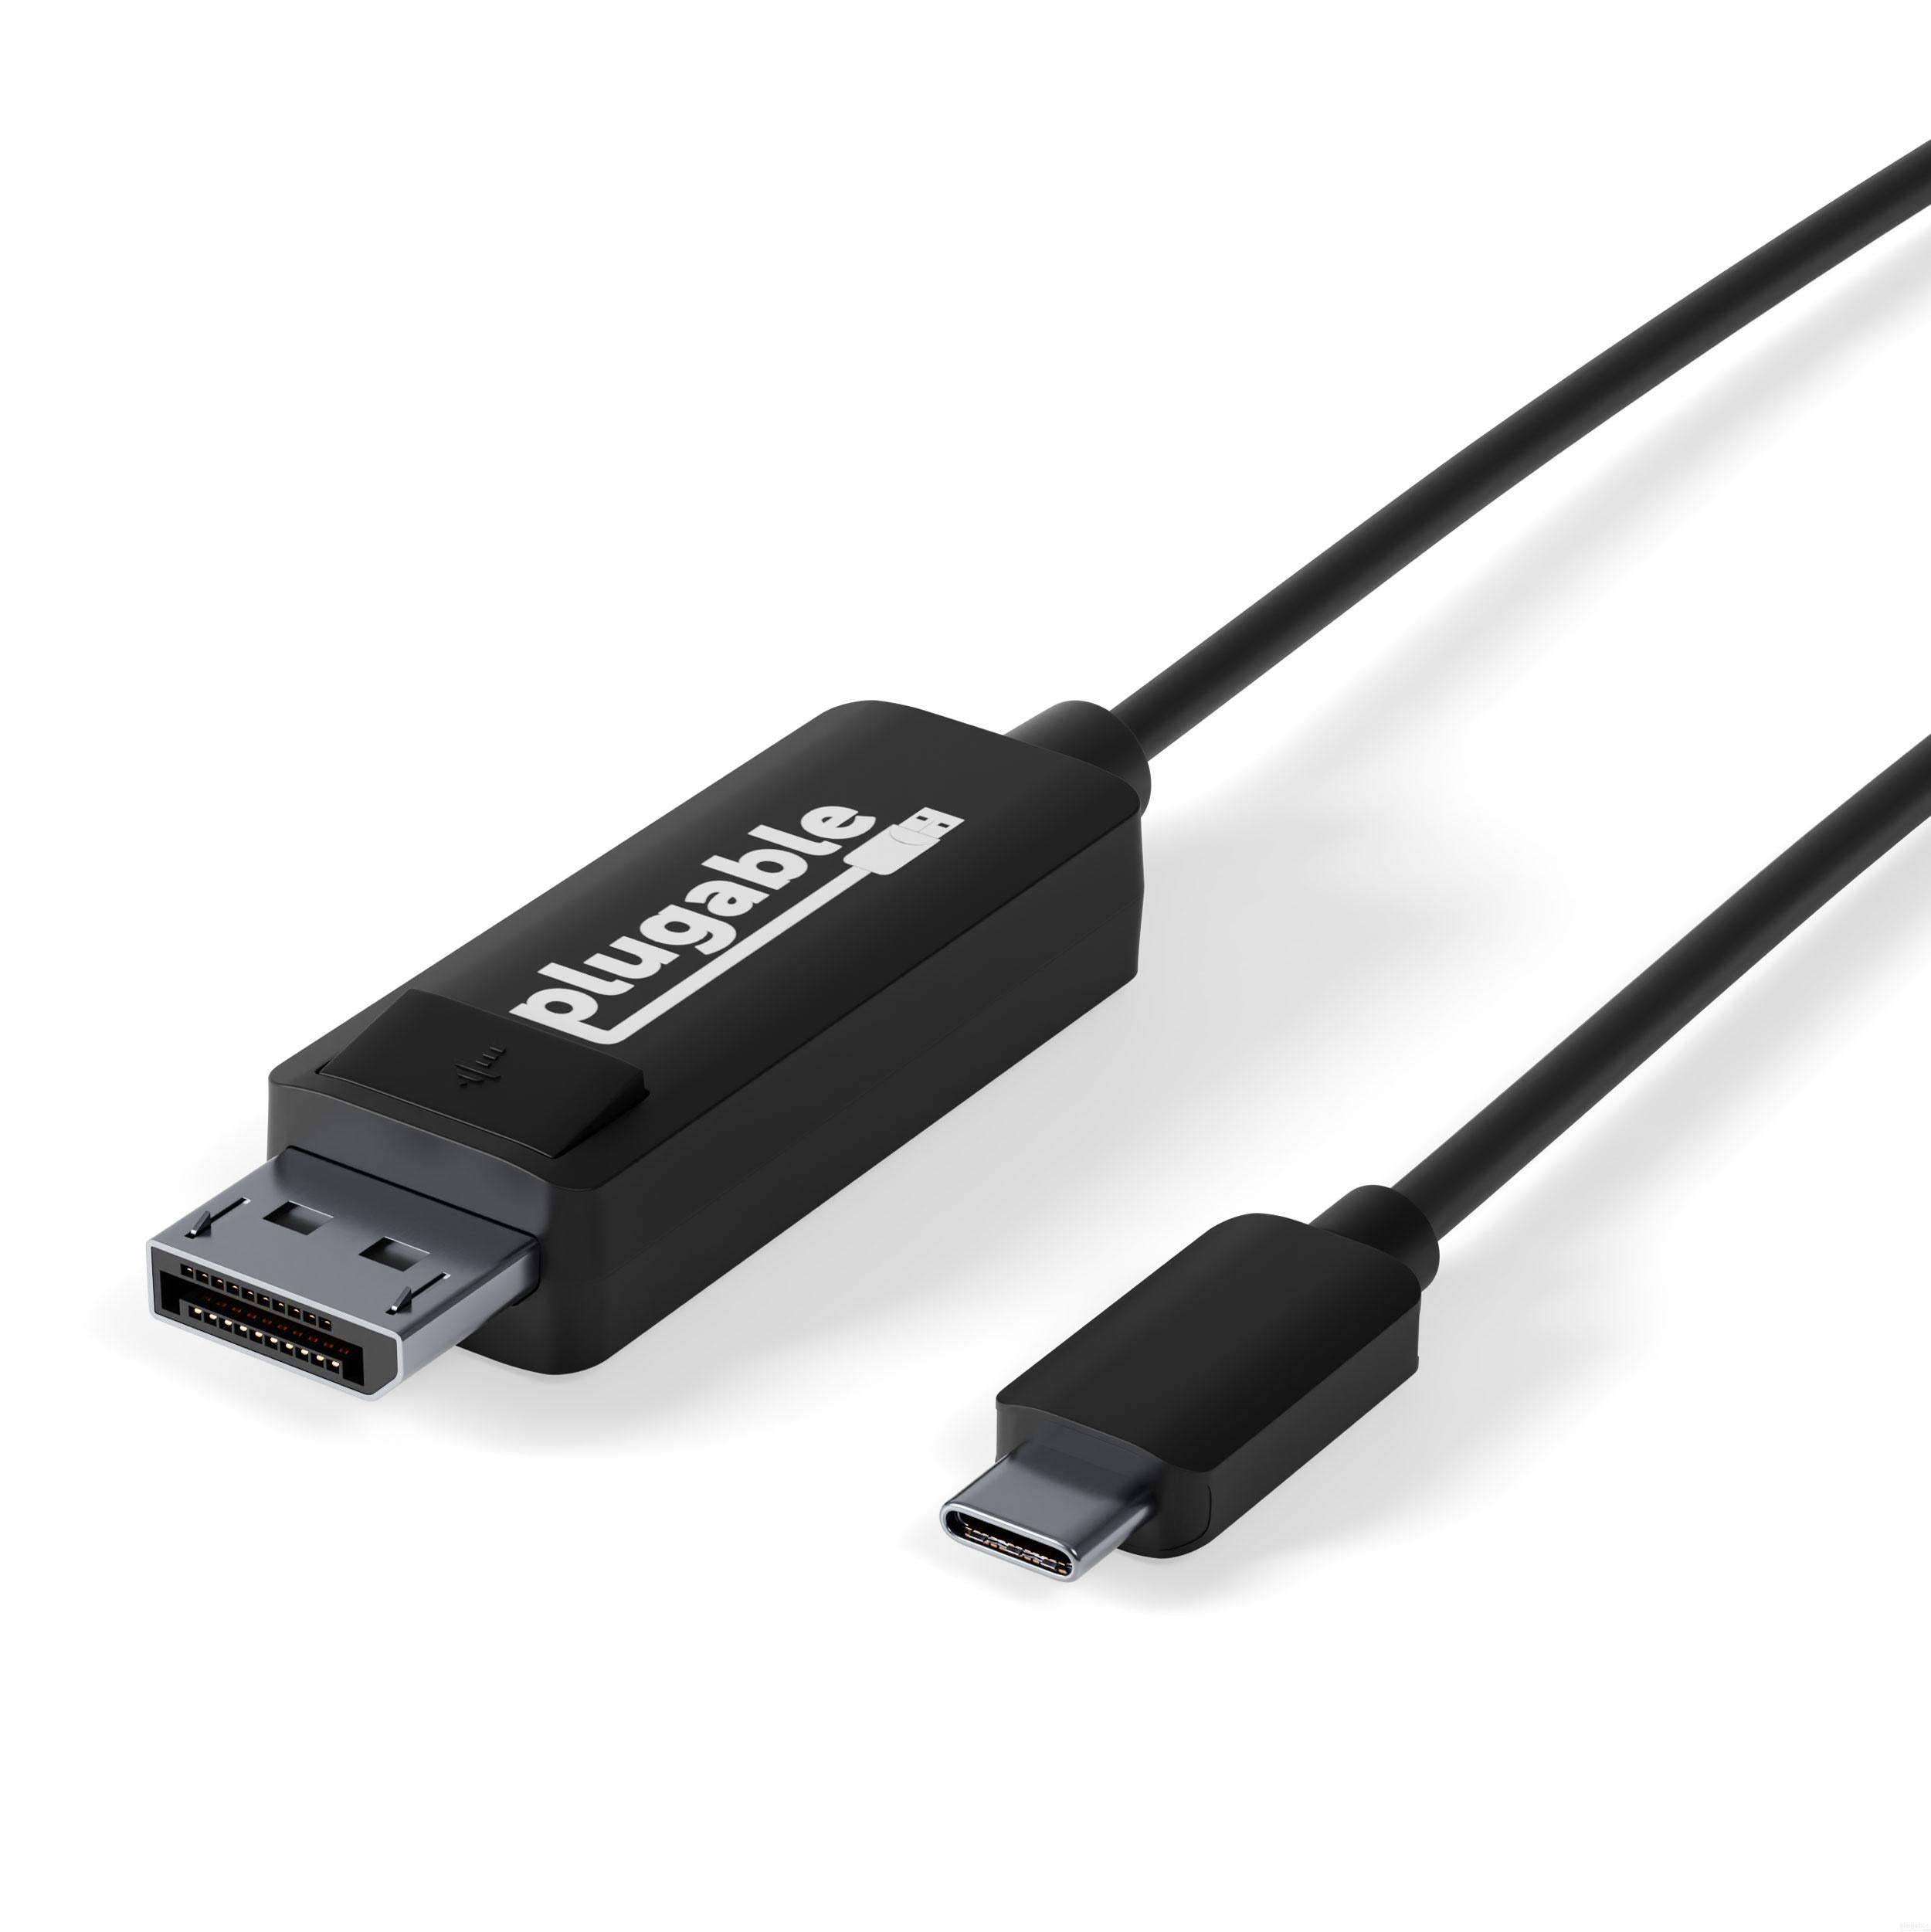 Plugable 3.1 to DisplayPort Adapter Cable – Plugable